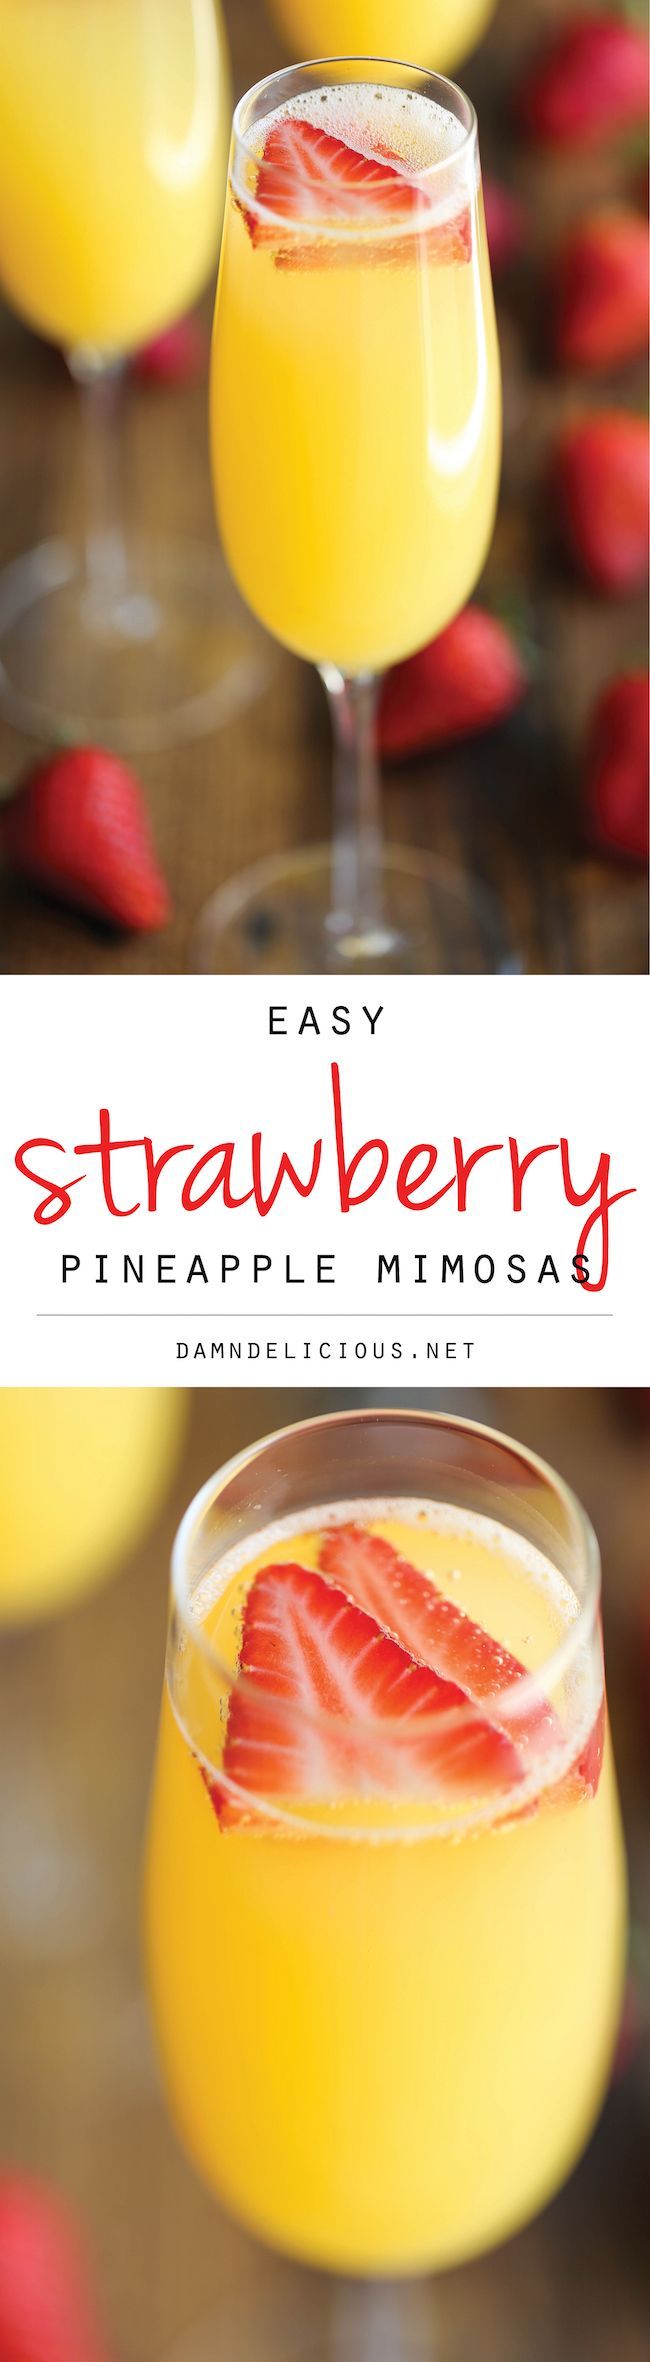 Strawberry Pineapple Mimosas – The easiest, quickest, and best 4-ingredient mimosa ever. And all you need is just 5 min to whip